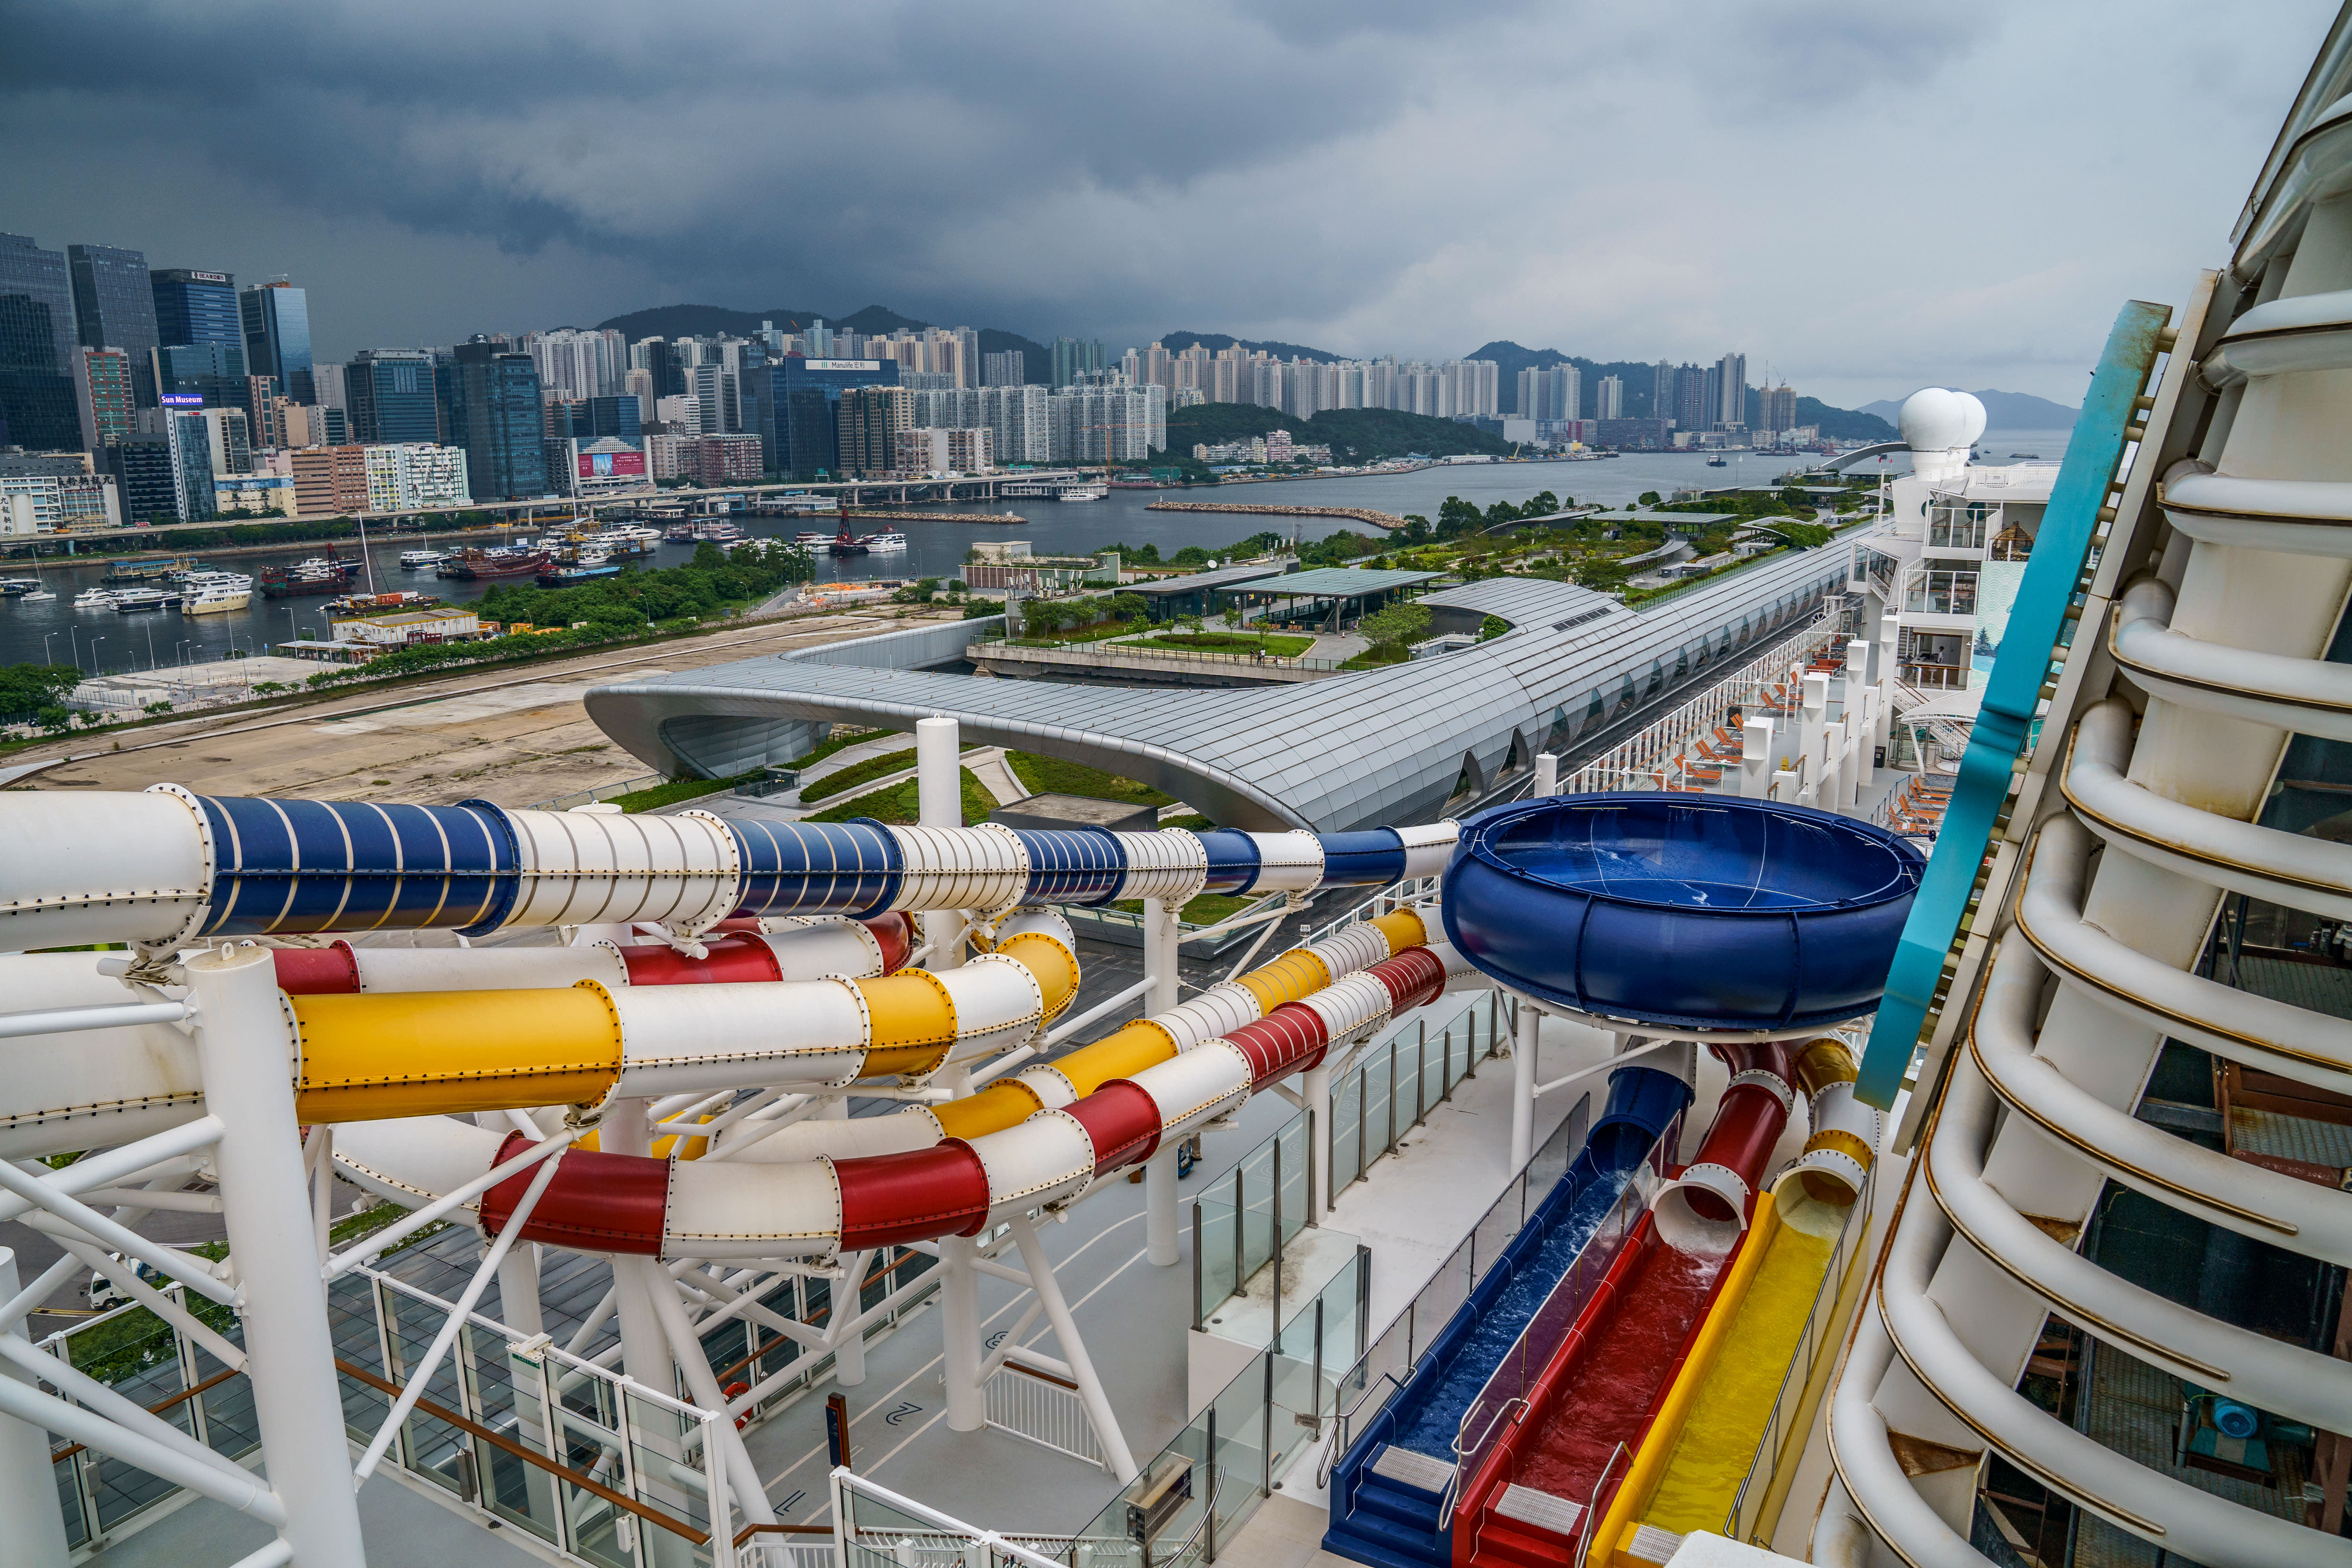 Cruise operator Genting Hong Kong files to wind up company as cash runs out - CNBC : In a filing to the Hong Kong exchange, Genting said it has "imminently be unable to pay its debts as they fall due," as its liquidity dries up.  | Tranquility 國際社群